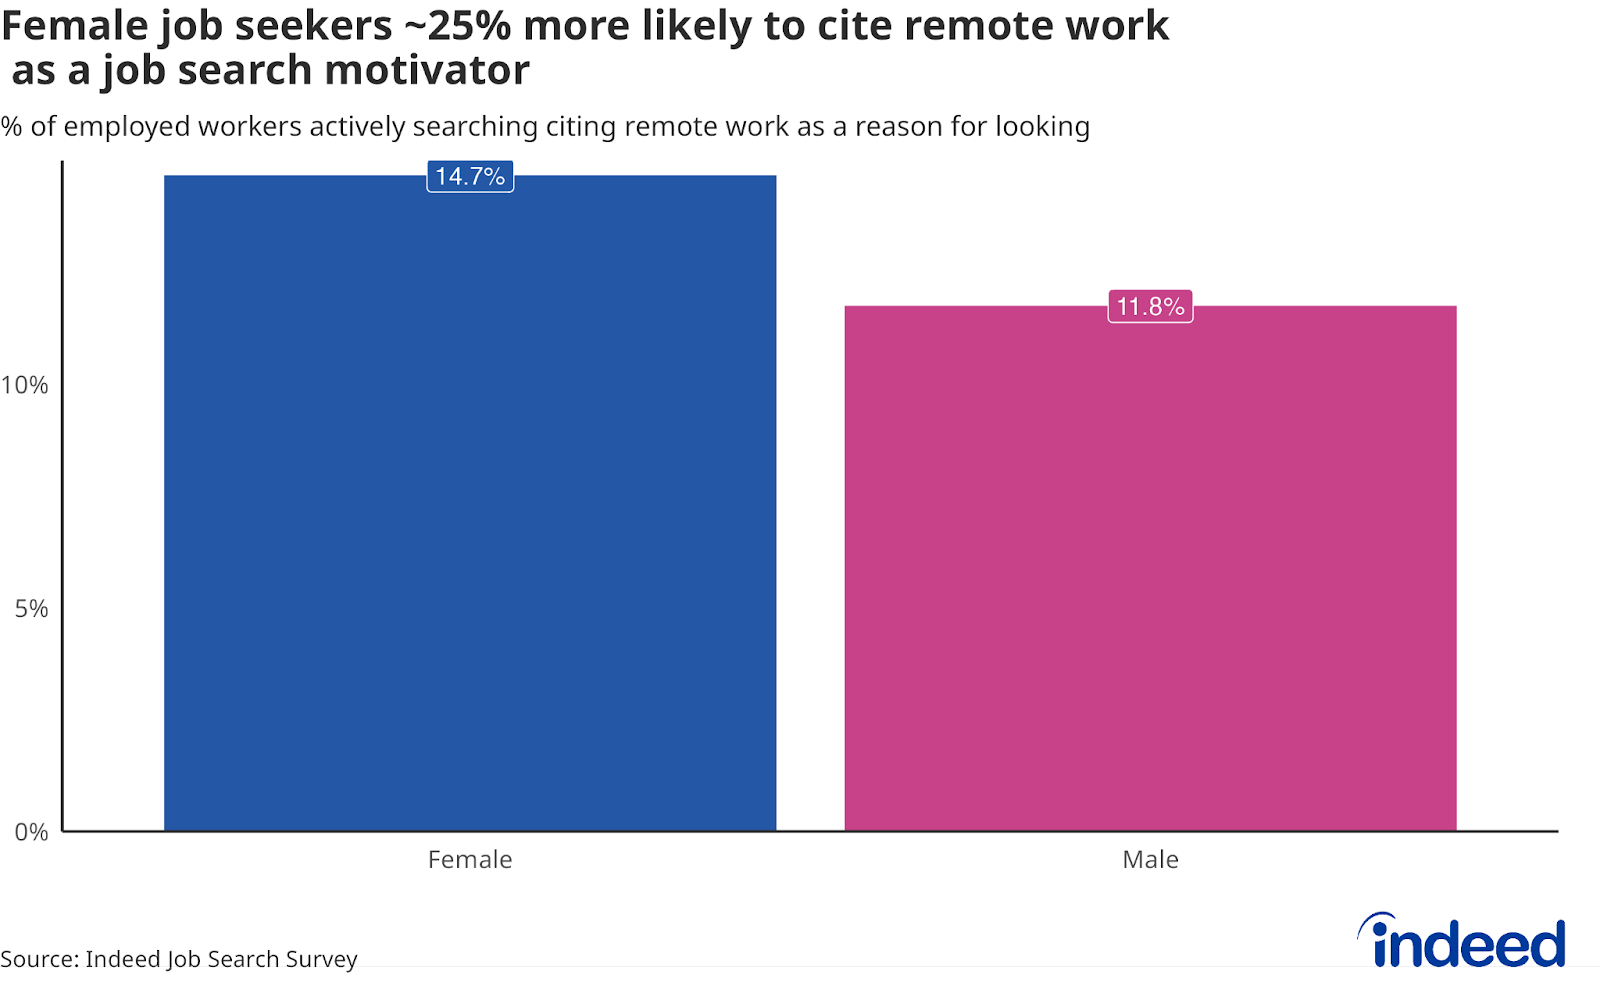 Bar chart titled “Female job seekers ~25% more likely to cite remote work as a job search motivator” shows that 11.8% of employed male job seekers cited remote work, while 14.7% of female job seekers did.